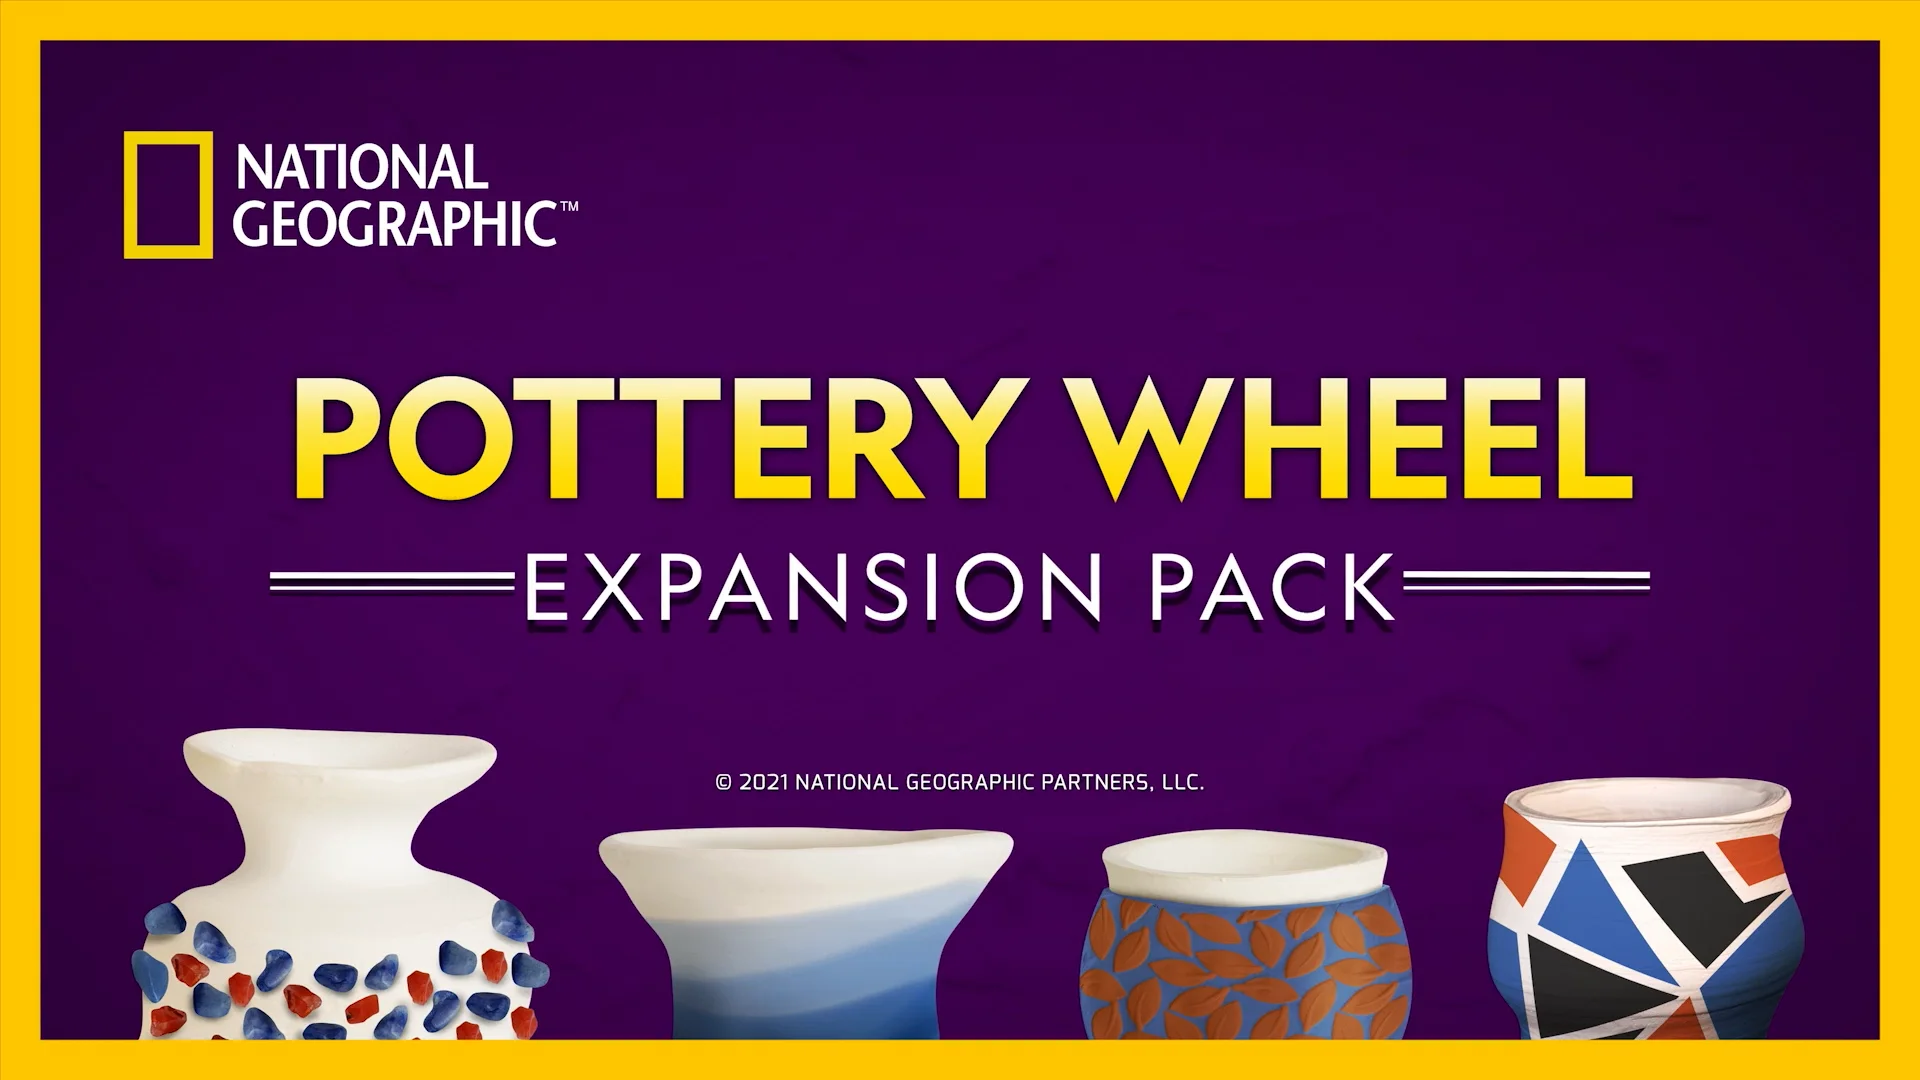 National Geographic - Pottery Wheel Expansion Pack on Vimeo